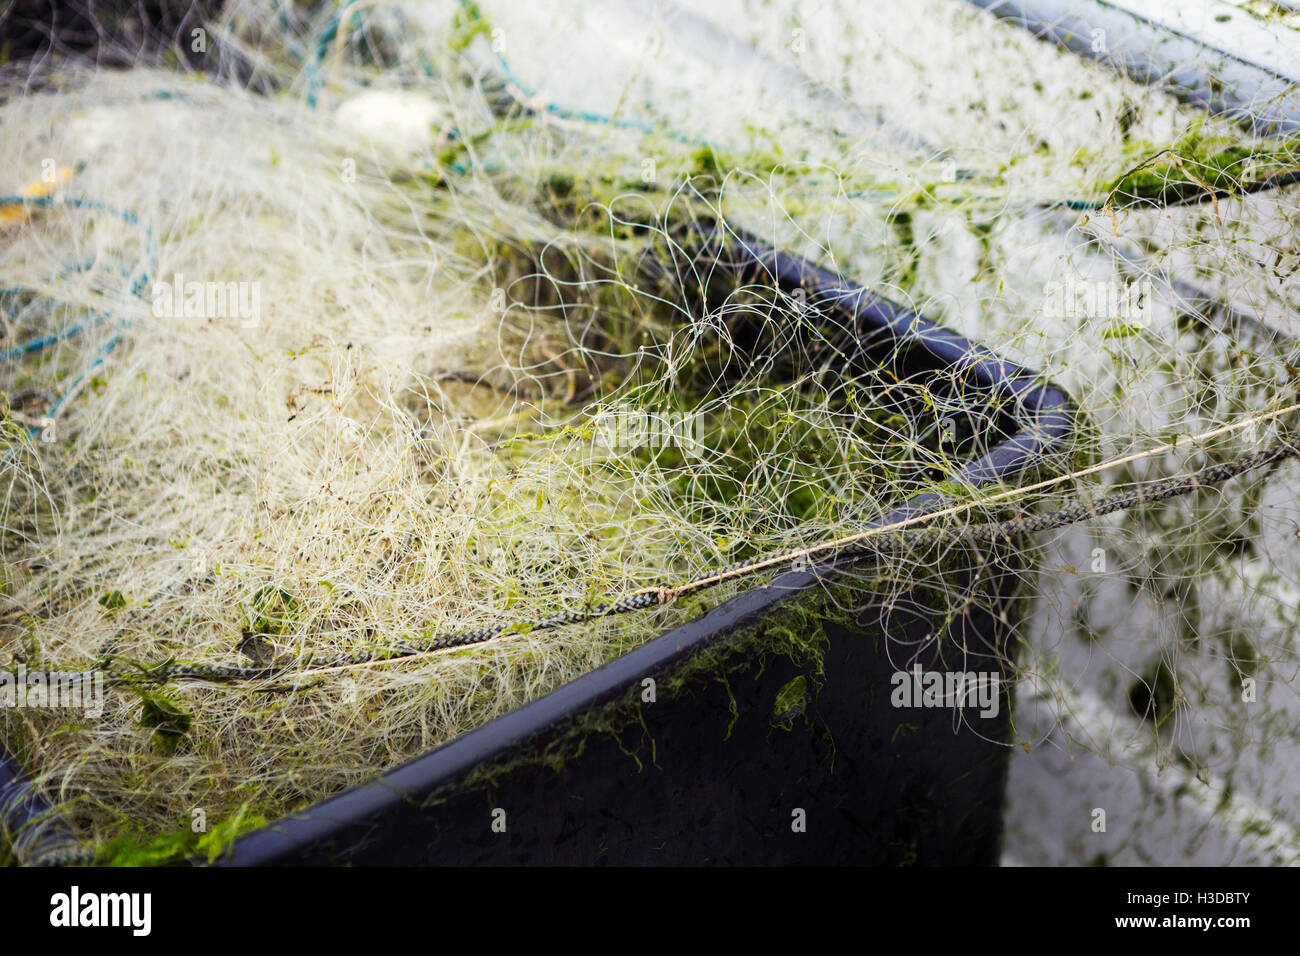 Fishing nets in a black plastic crate Stock Photo - Alamy